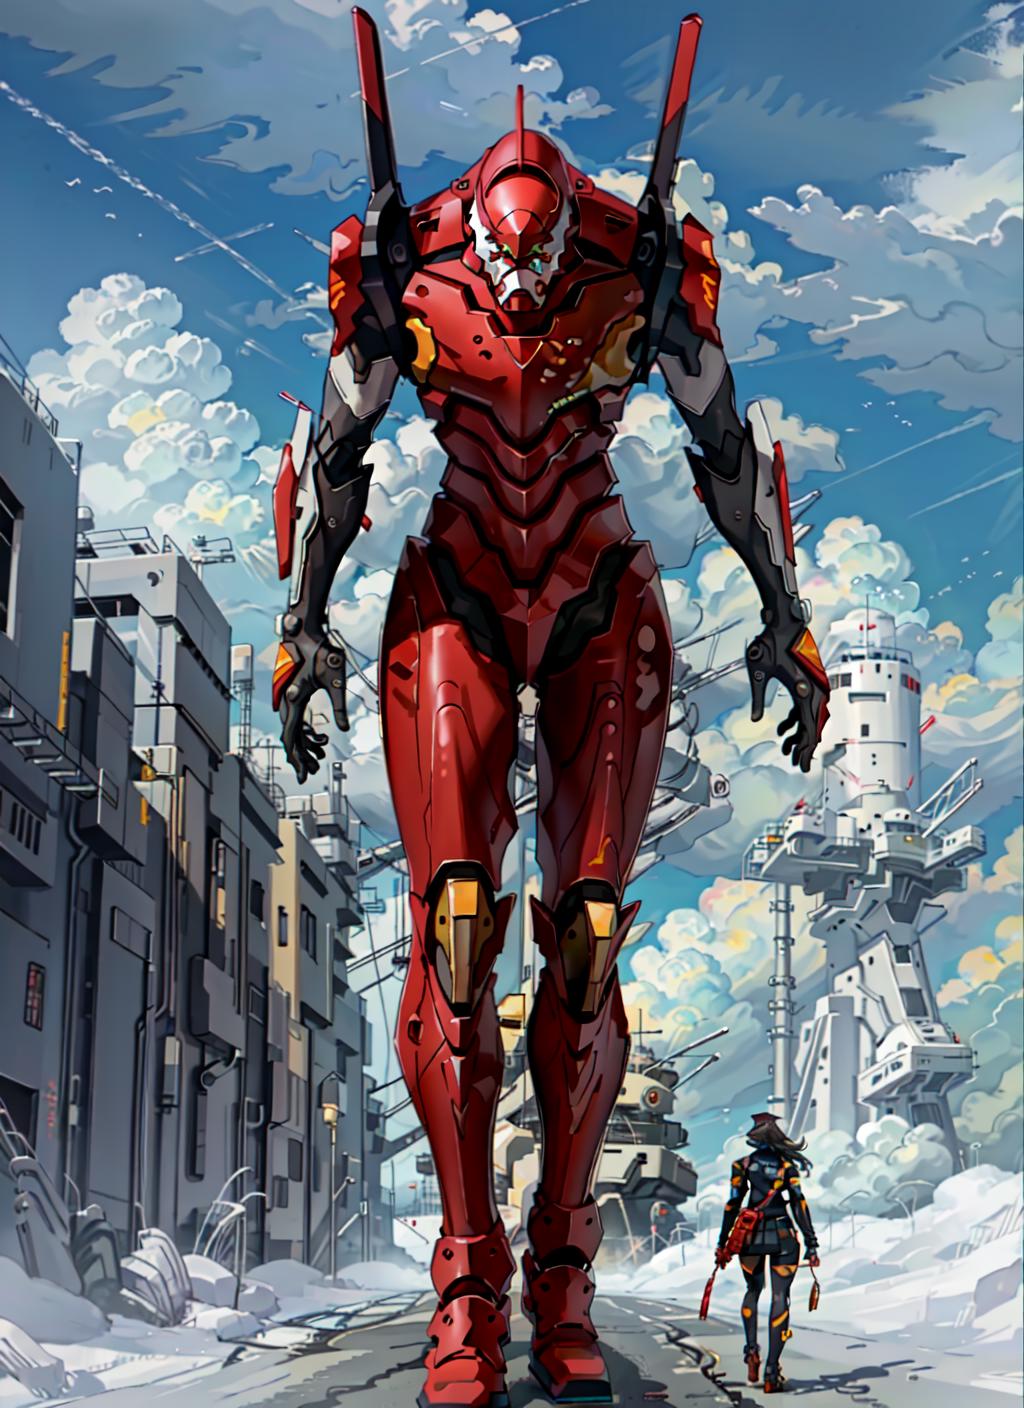 A Red and Gray Robotic Suit with a Sword in Hand, Standing in Front of Buildings and a Cloudy Sky.